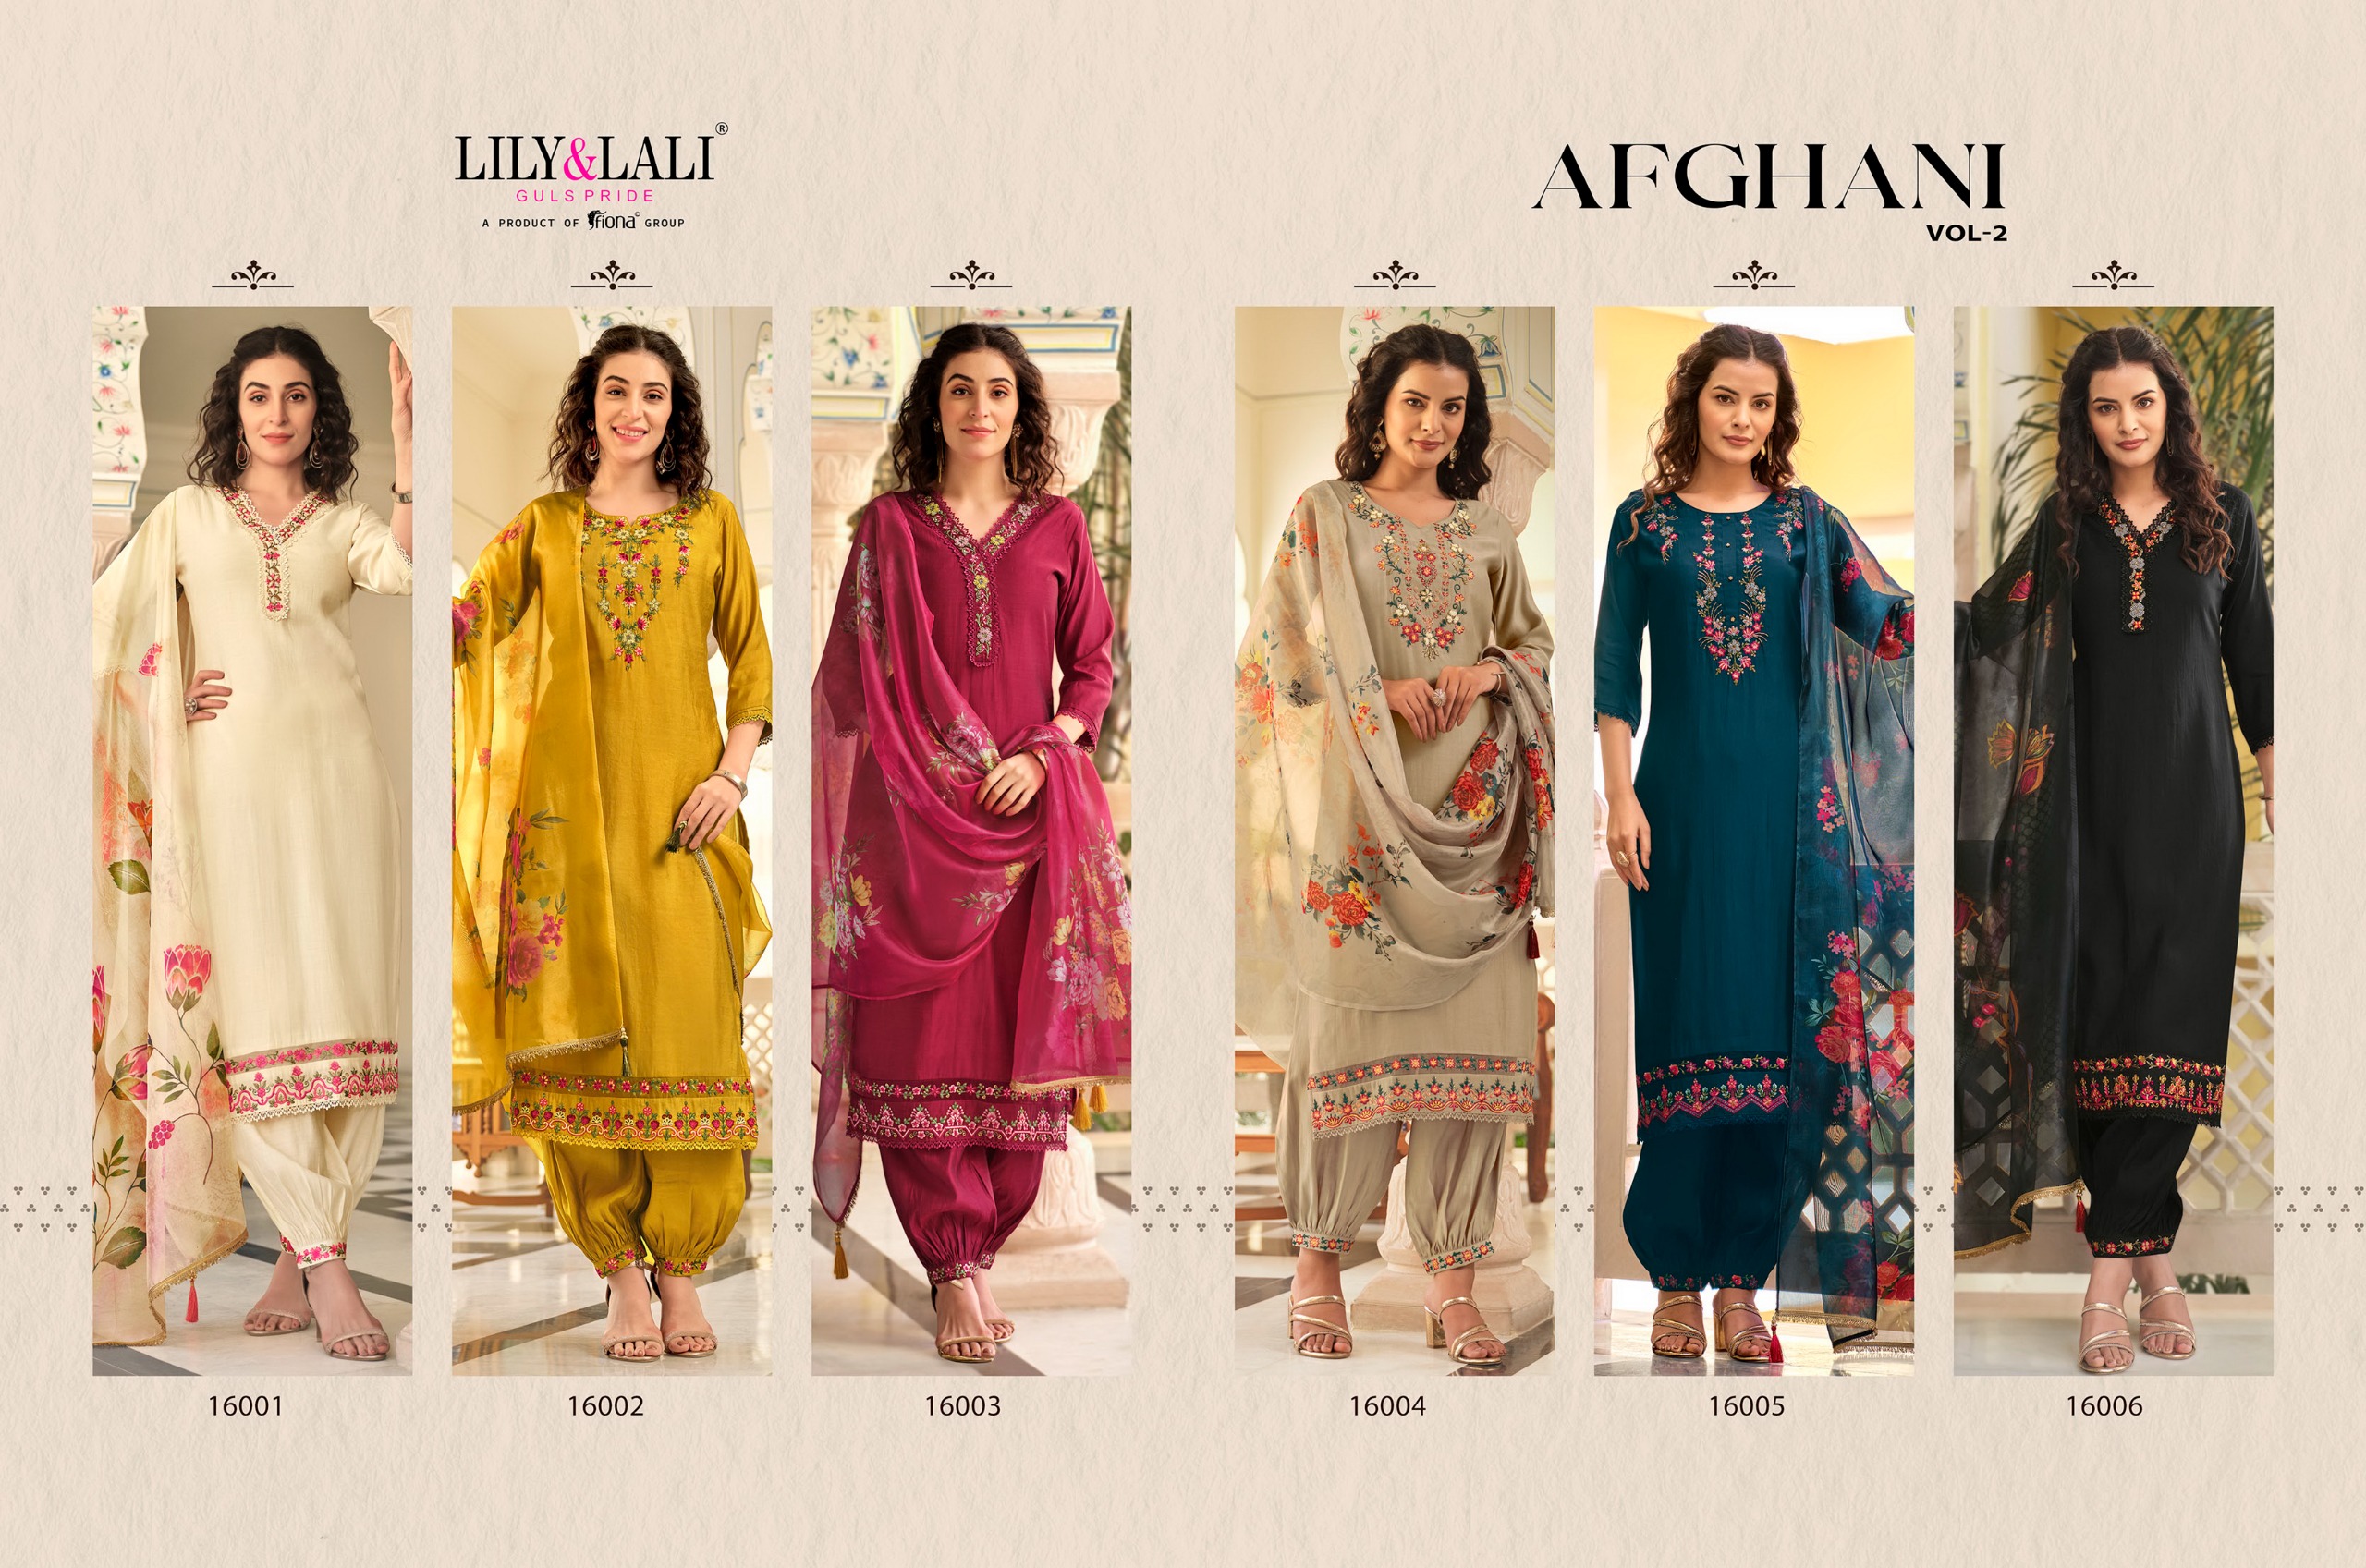 Lily And Lali Afghani Vol 2 collection 8